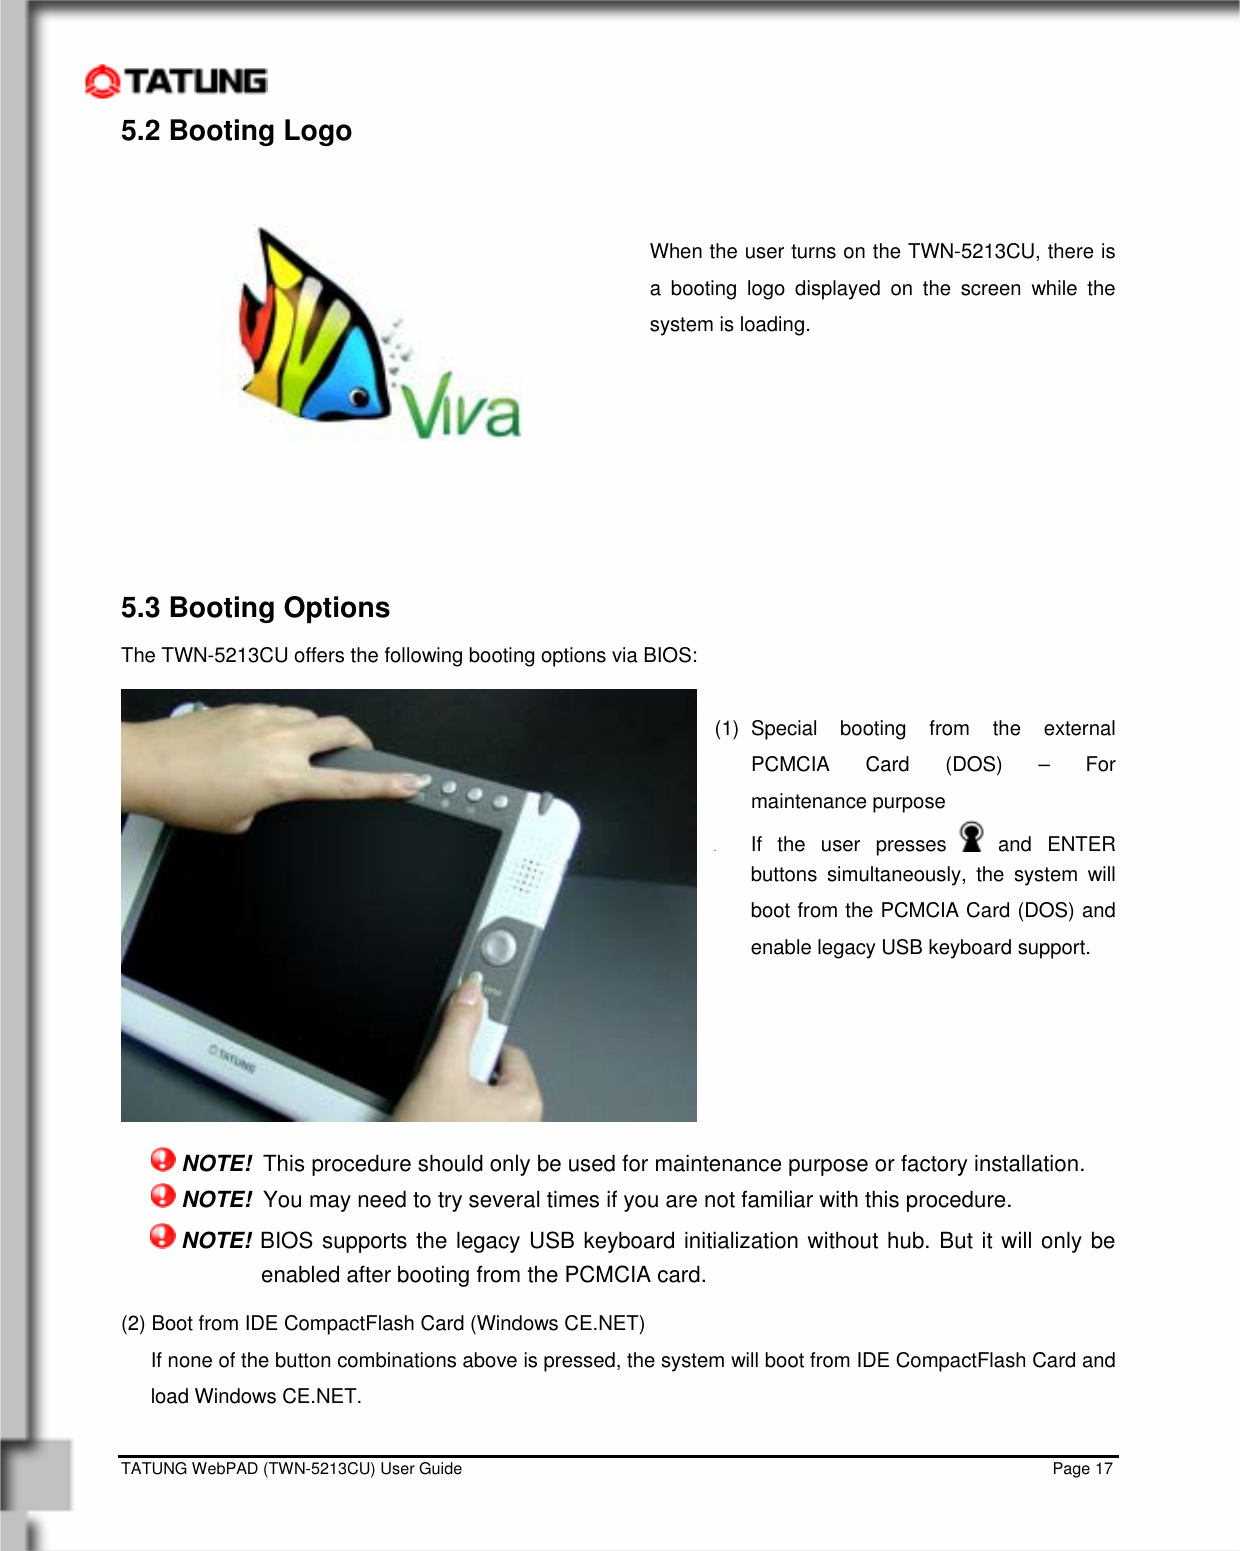    TATUNG WebPAD (TWN-5213CU) User Guide                                                                                                                                   Page 17 5.2 Booting Logo   When the user turns on the TWN-5213CU, there is a booting logo displayed on the screen while the system is loading.        5.3 Booting Options The TWN-5213CU offers the following booting options via BIOS:  (1) Special booting from the external PCMCIA Card (DOS) – For maintenance purpose z If the user presses   and  ENTER buttons simultaneously, the system will boot from the PCMCIA Card (DOS) and enable legacy USB keyboard support.        NOTE!  This procedure should only be used for maintenance purpose or factory installation.  NOTE!  You may need to try several times if you are not familiar with this procedure.  NOTE! BIOS supports the legacy USB keyboard initialization without hub. But it will only be enabled after booting from the PCMCIA card. (2) Boot from IDE CompactFlash Card (Windows CE.NET) If none of the button combinations above is pressed, the system will boot from IDE CompactFlash Card and load Windows CE.NET.           